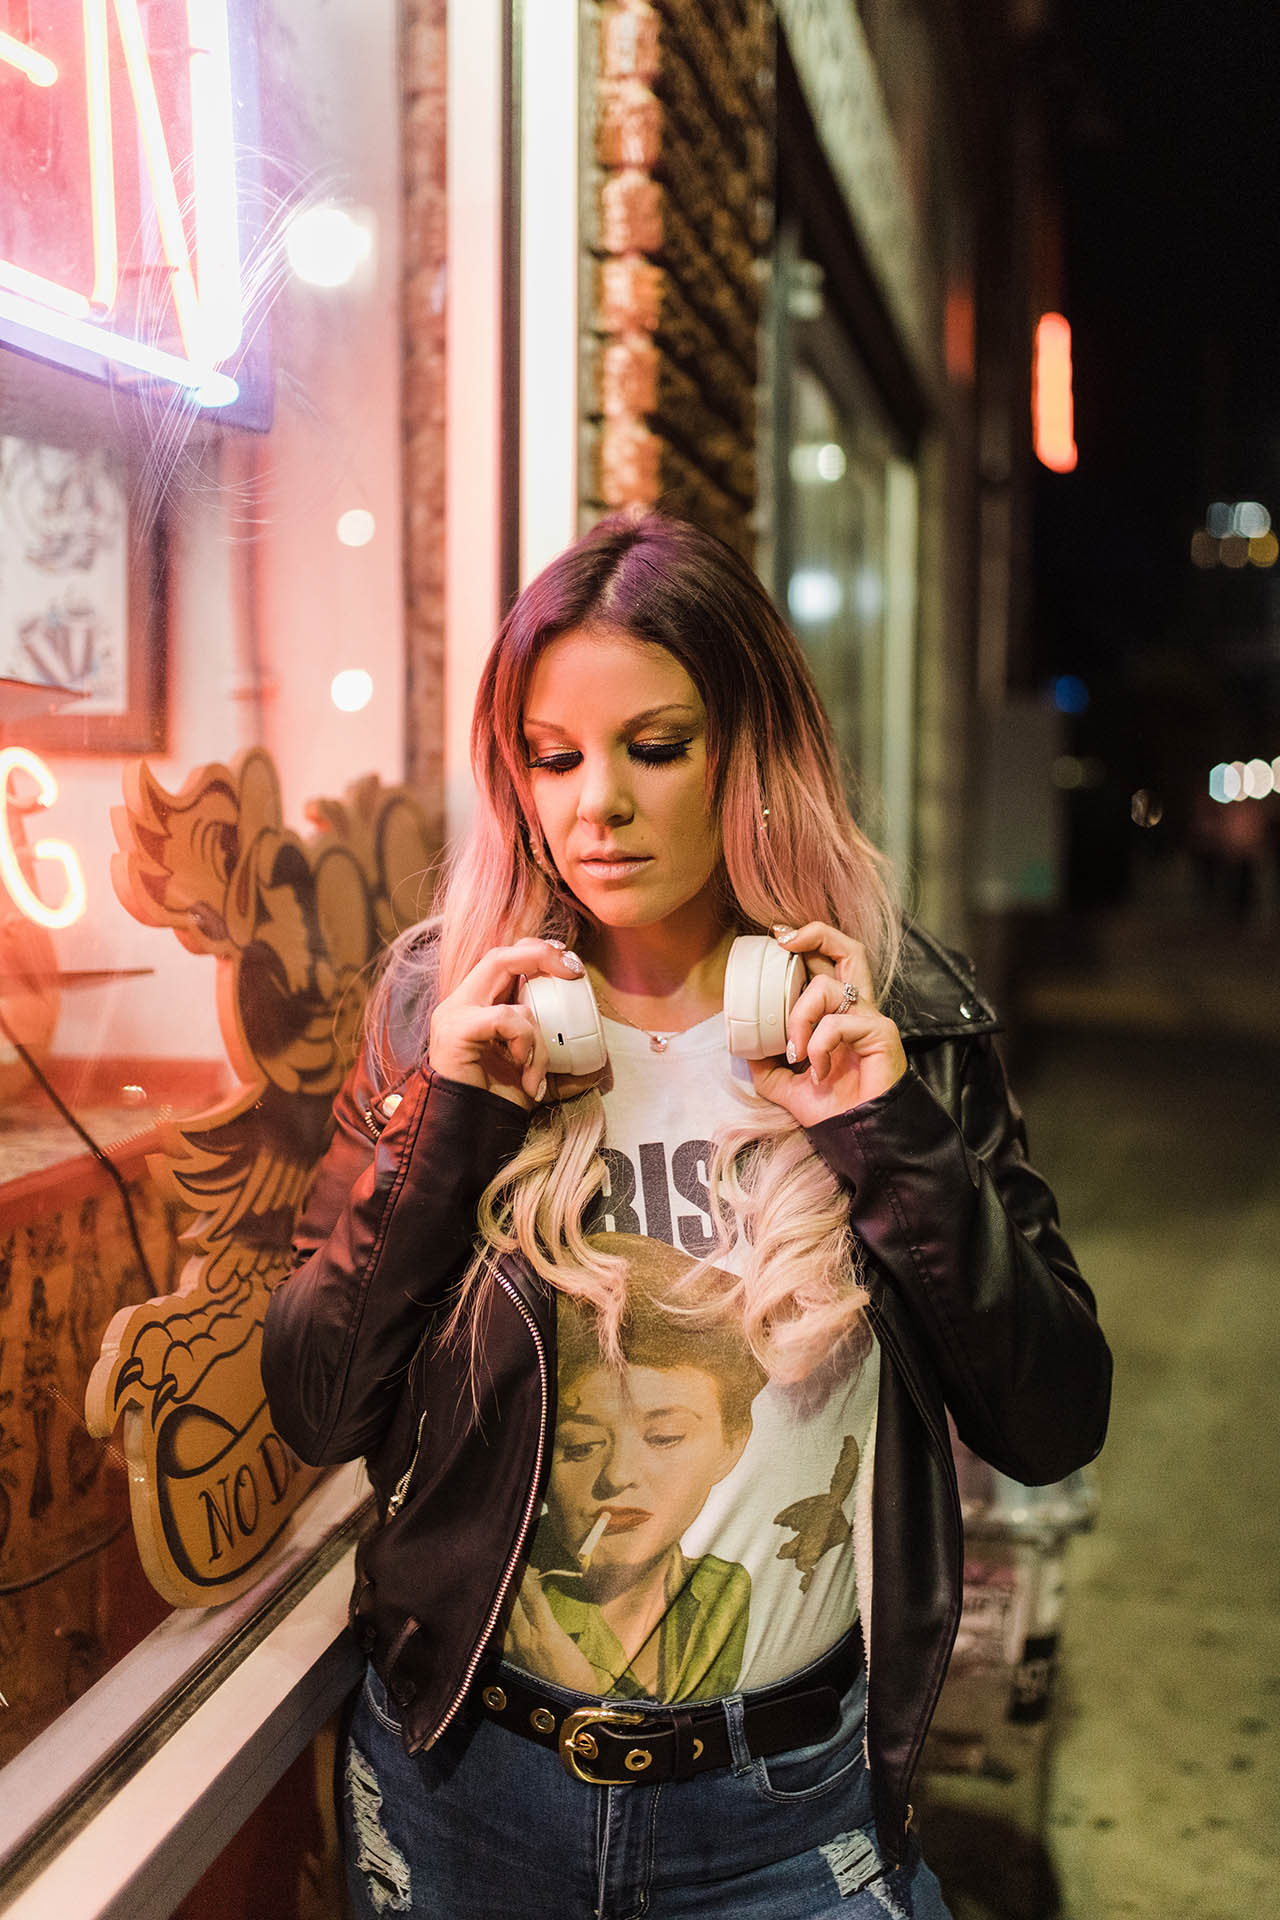 DFW branding photos; a woman wearing elaborate makeup, a black leather jacket, and a white graphic shirt looking down and holding the headphones around her neck in a downtown city setting